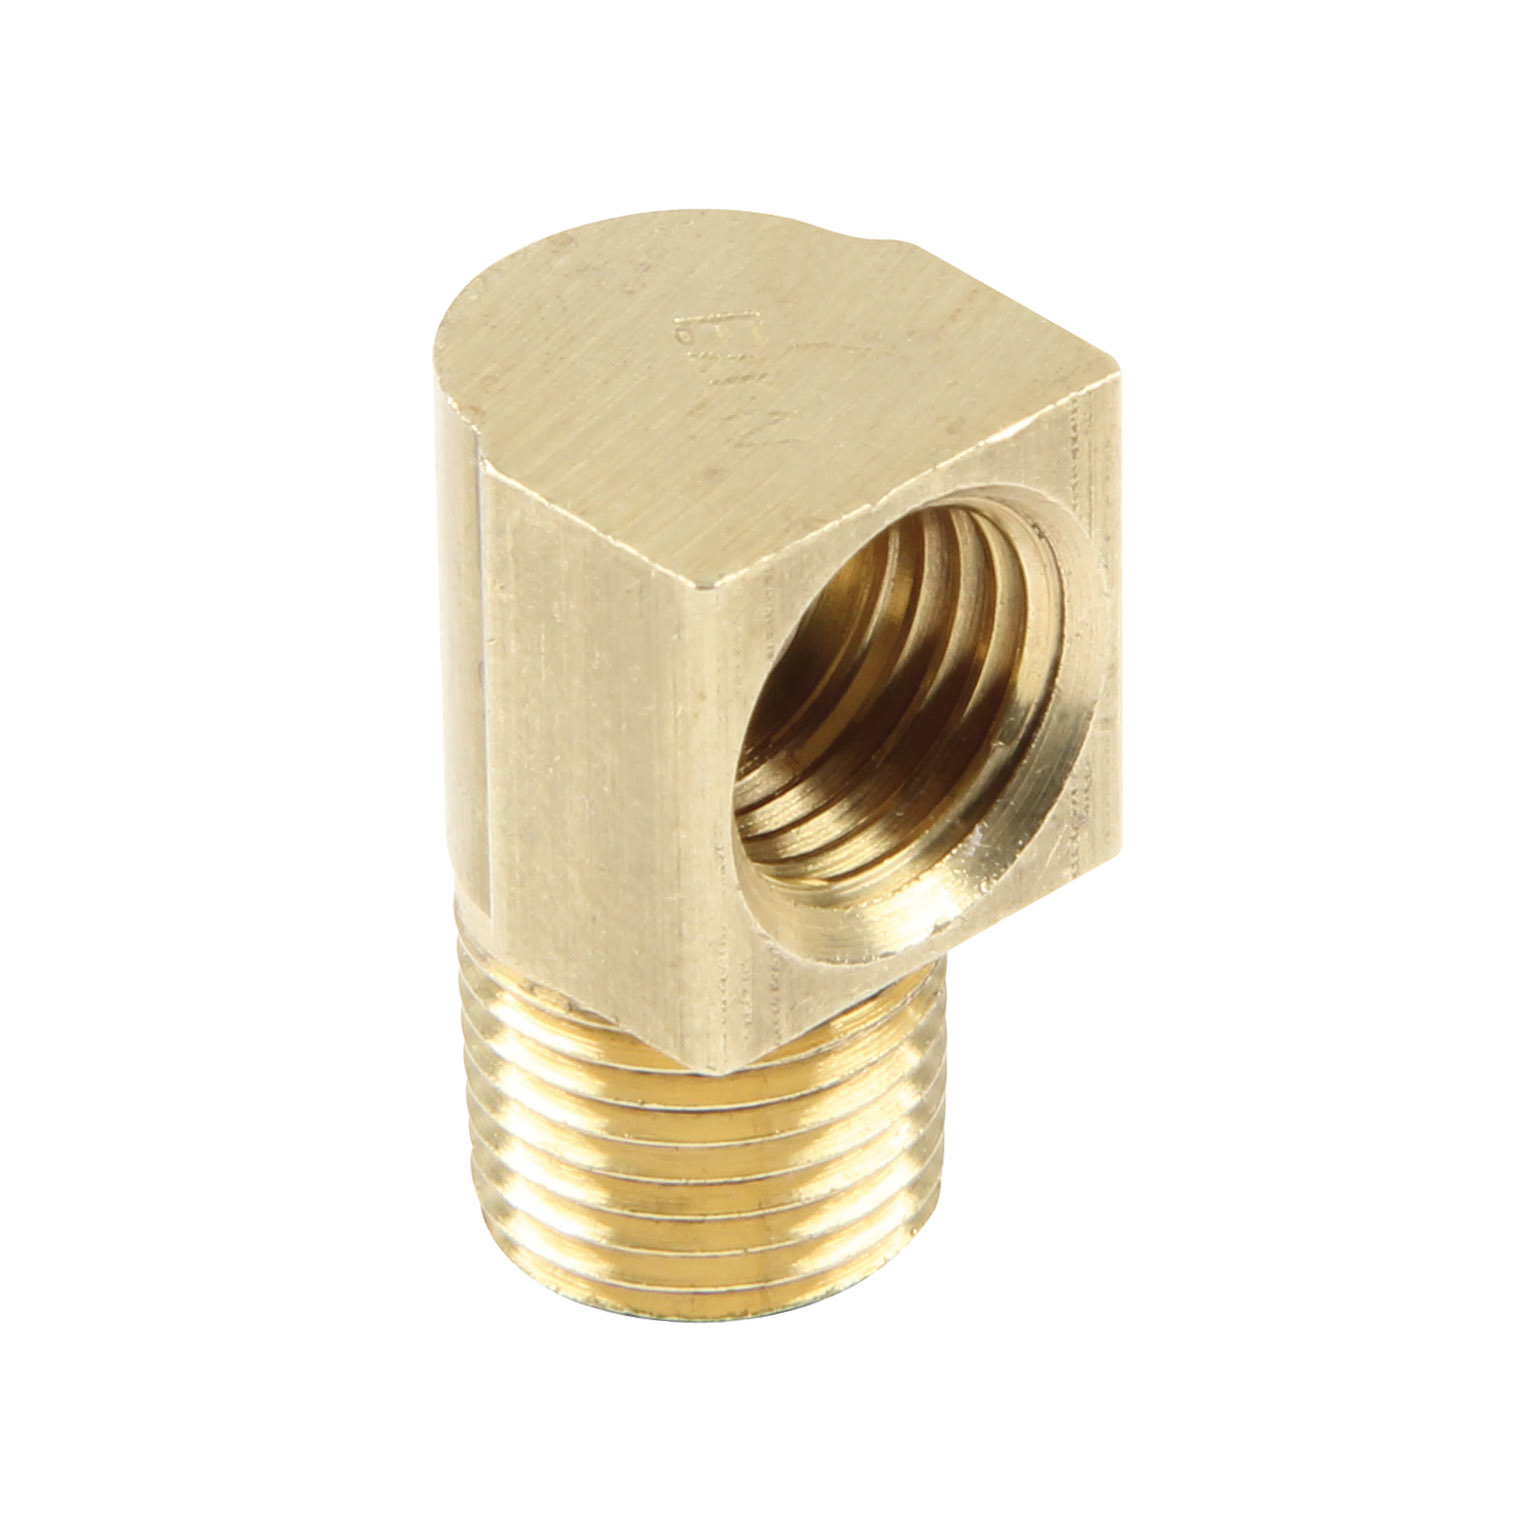 Allstar Performance 50125-50 Fitting, Adapter, 90 Degree, 1/8 in NPT Male to 3/8-24 in Inverted Flare Female, Brass, Natural, 3/16 in Hardline, Set of 50